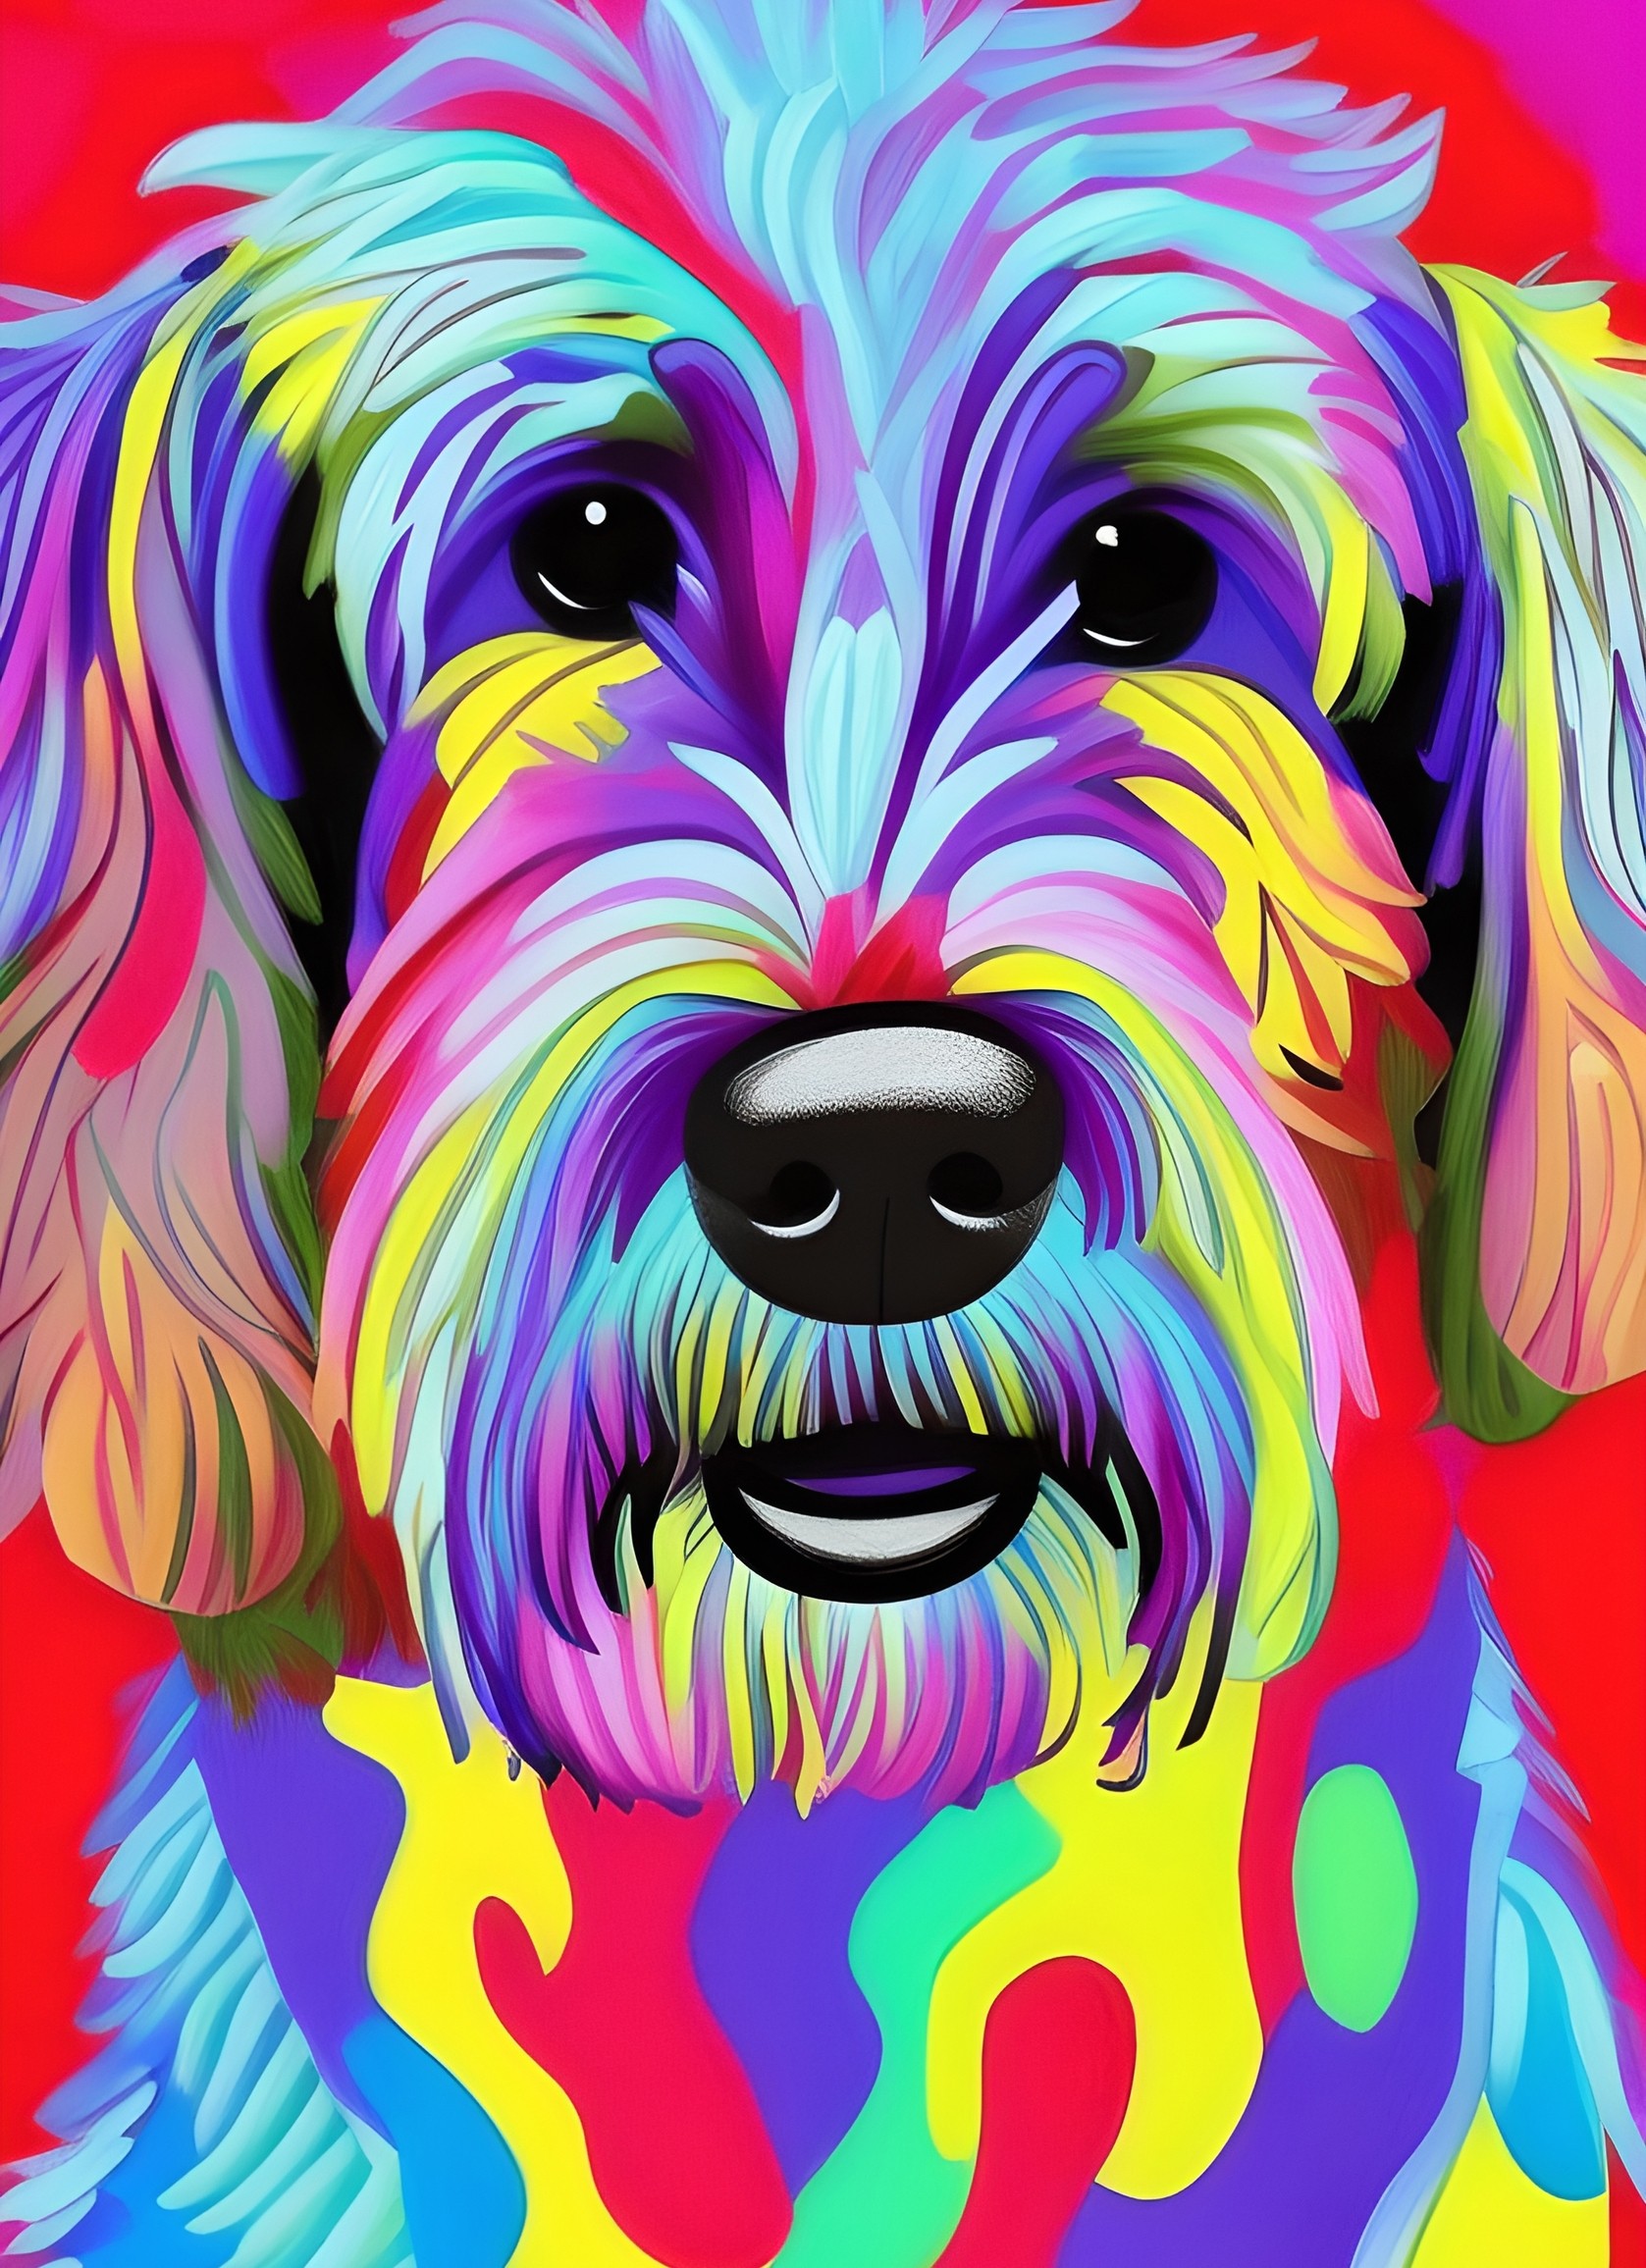 Labradoodle Dog Colourful Abstract Art Blank Greeting Card